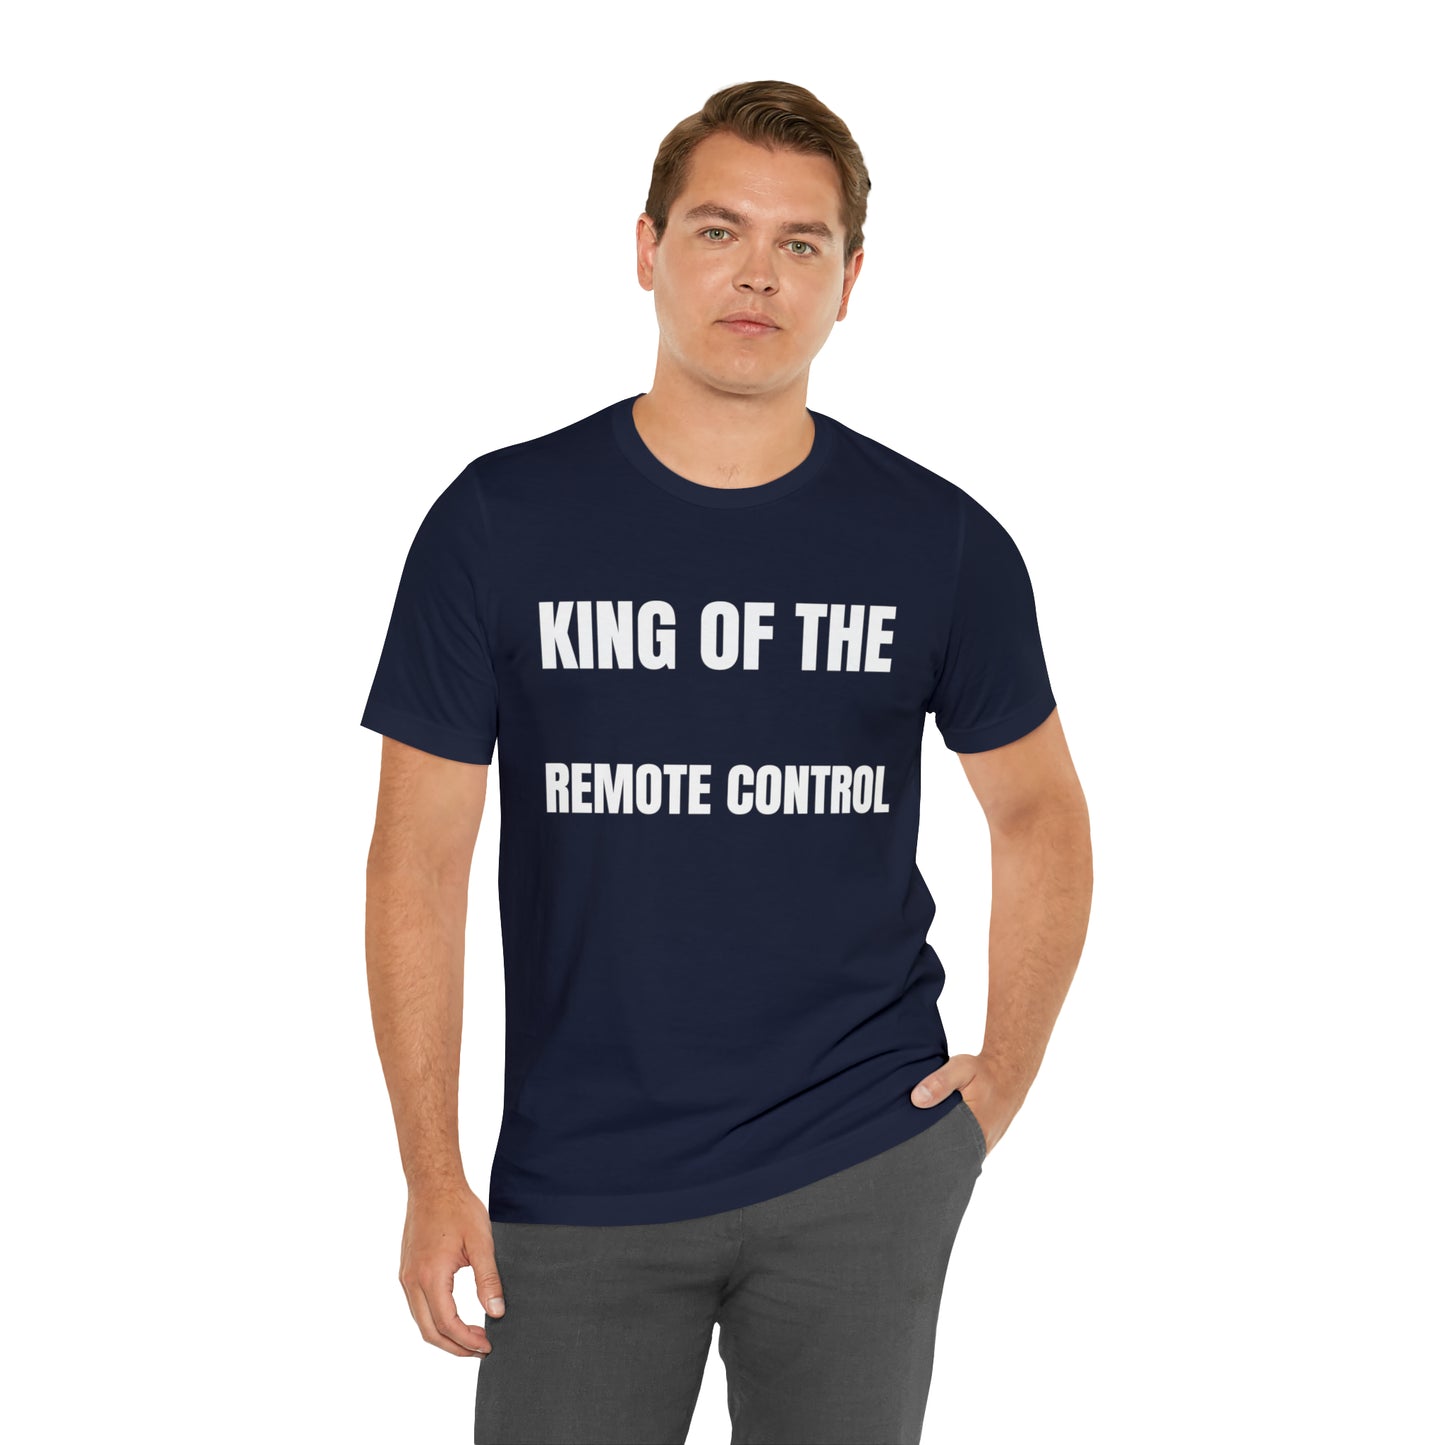 Unisex Jersey Tee: Short Sleeve, King of the Remote Control Design